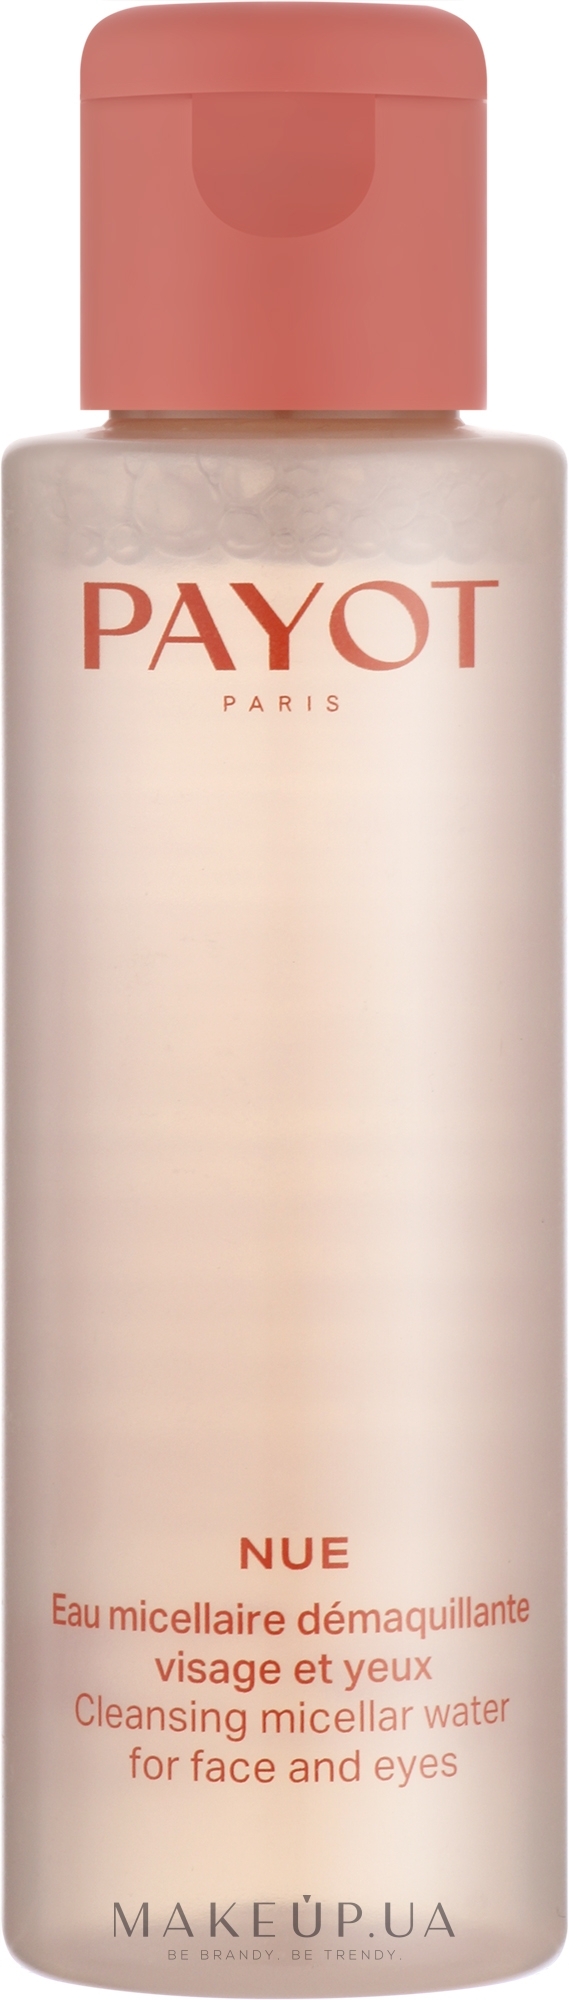 Міцелярна вода - Payot Nue Cleansing Micellar Water — фото 100ml